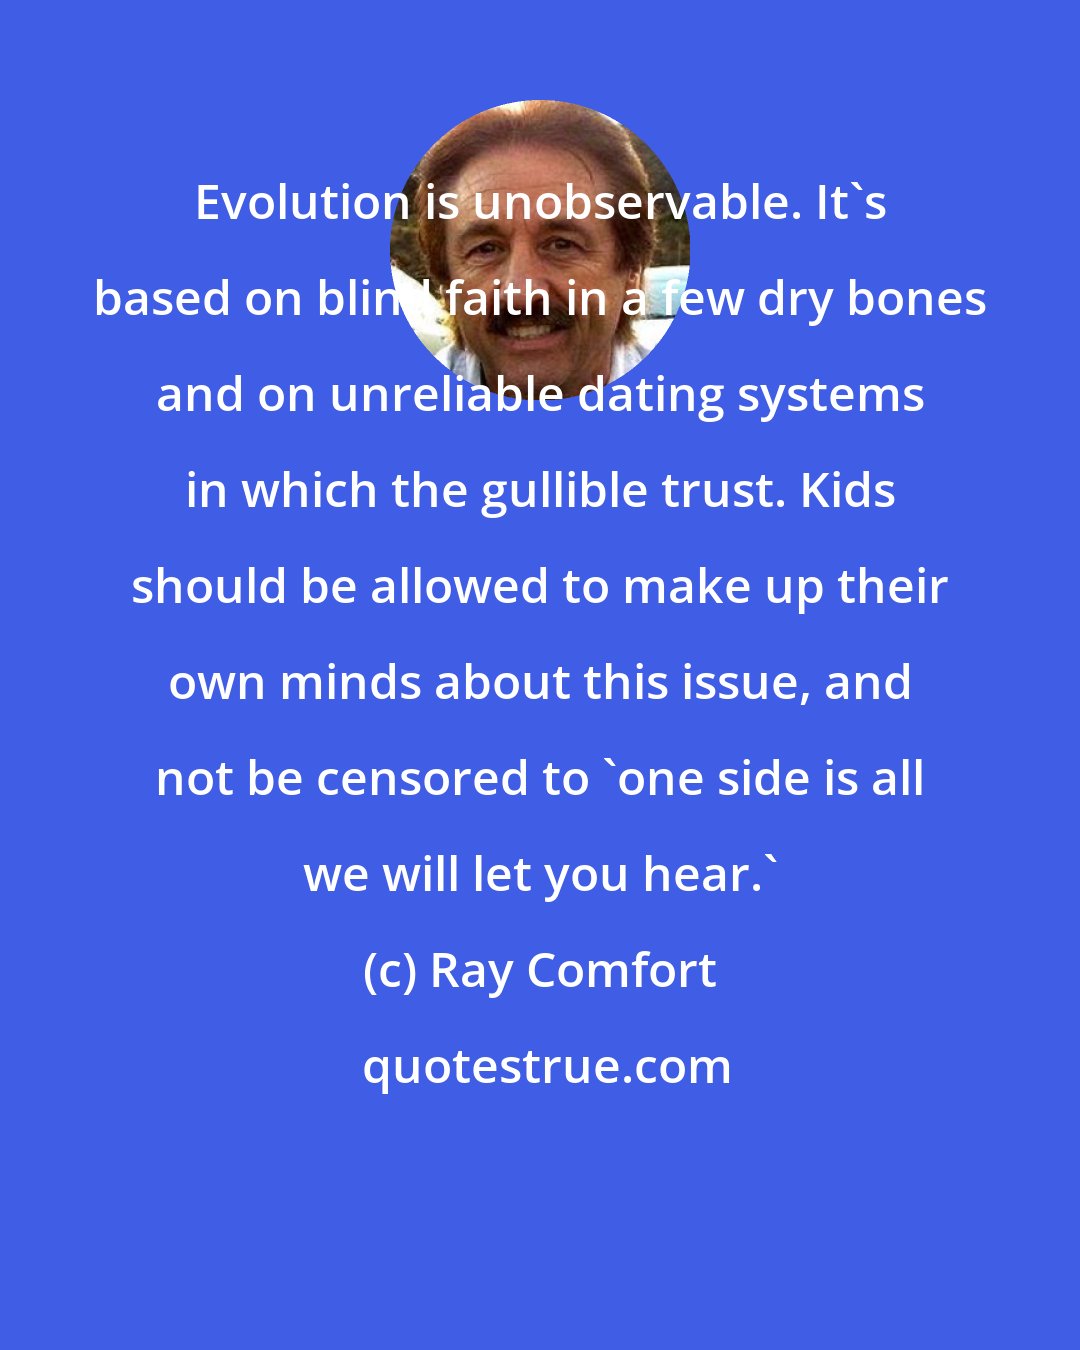 Ray Comfort: Evolution is unobservable. It's based on blind faith in a few dry bones and on unreliable dating systems in which the gullible trust. Kids should be allowed to make up their own minds about this issue, and not be censored to 'one side is all we will let you hear.'